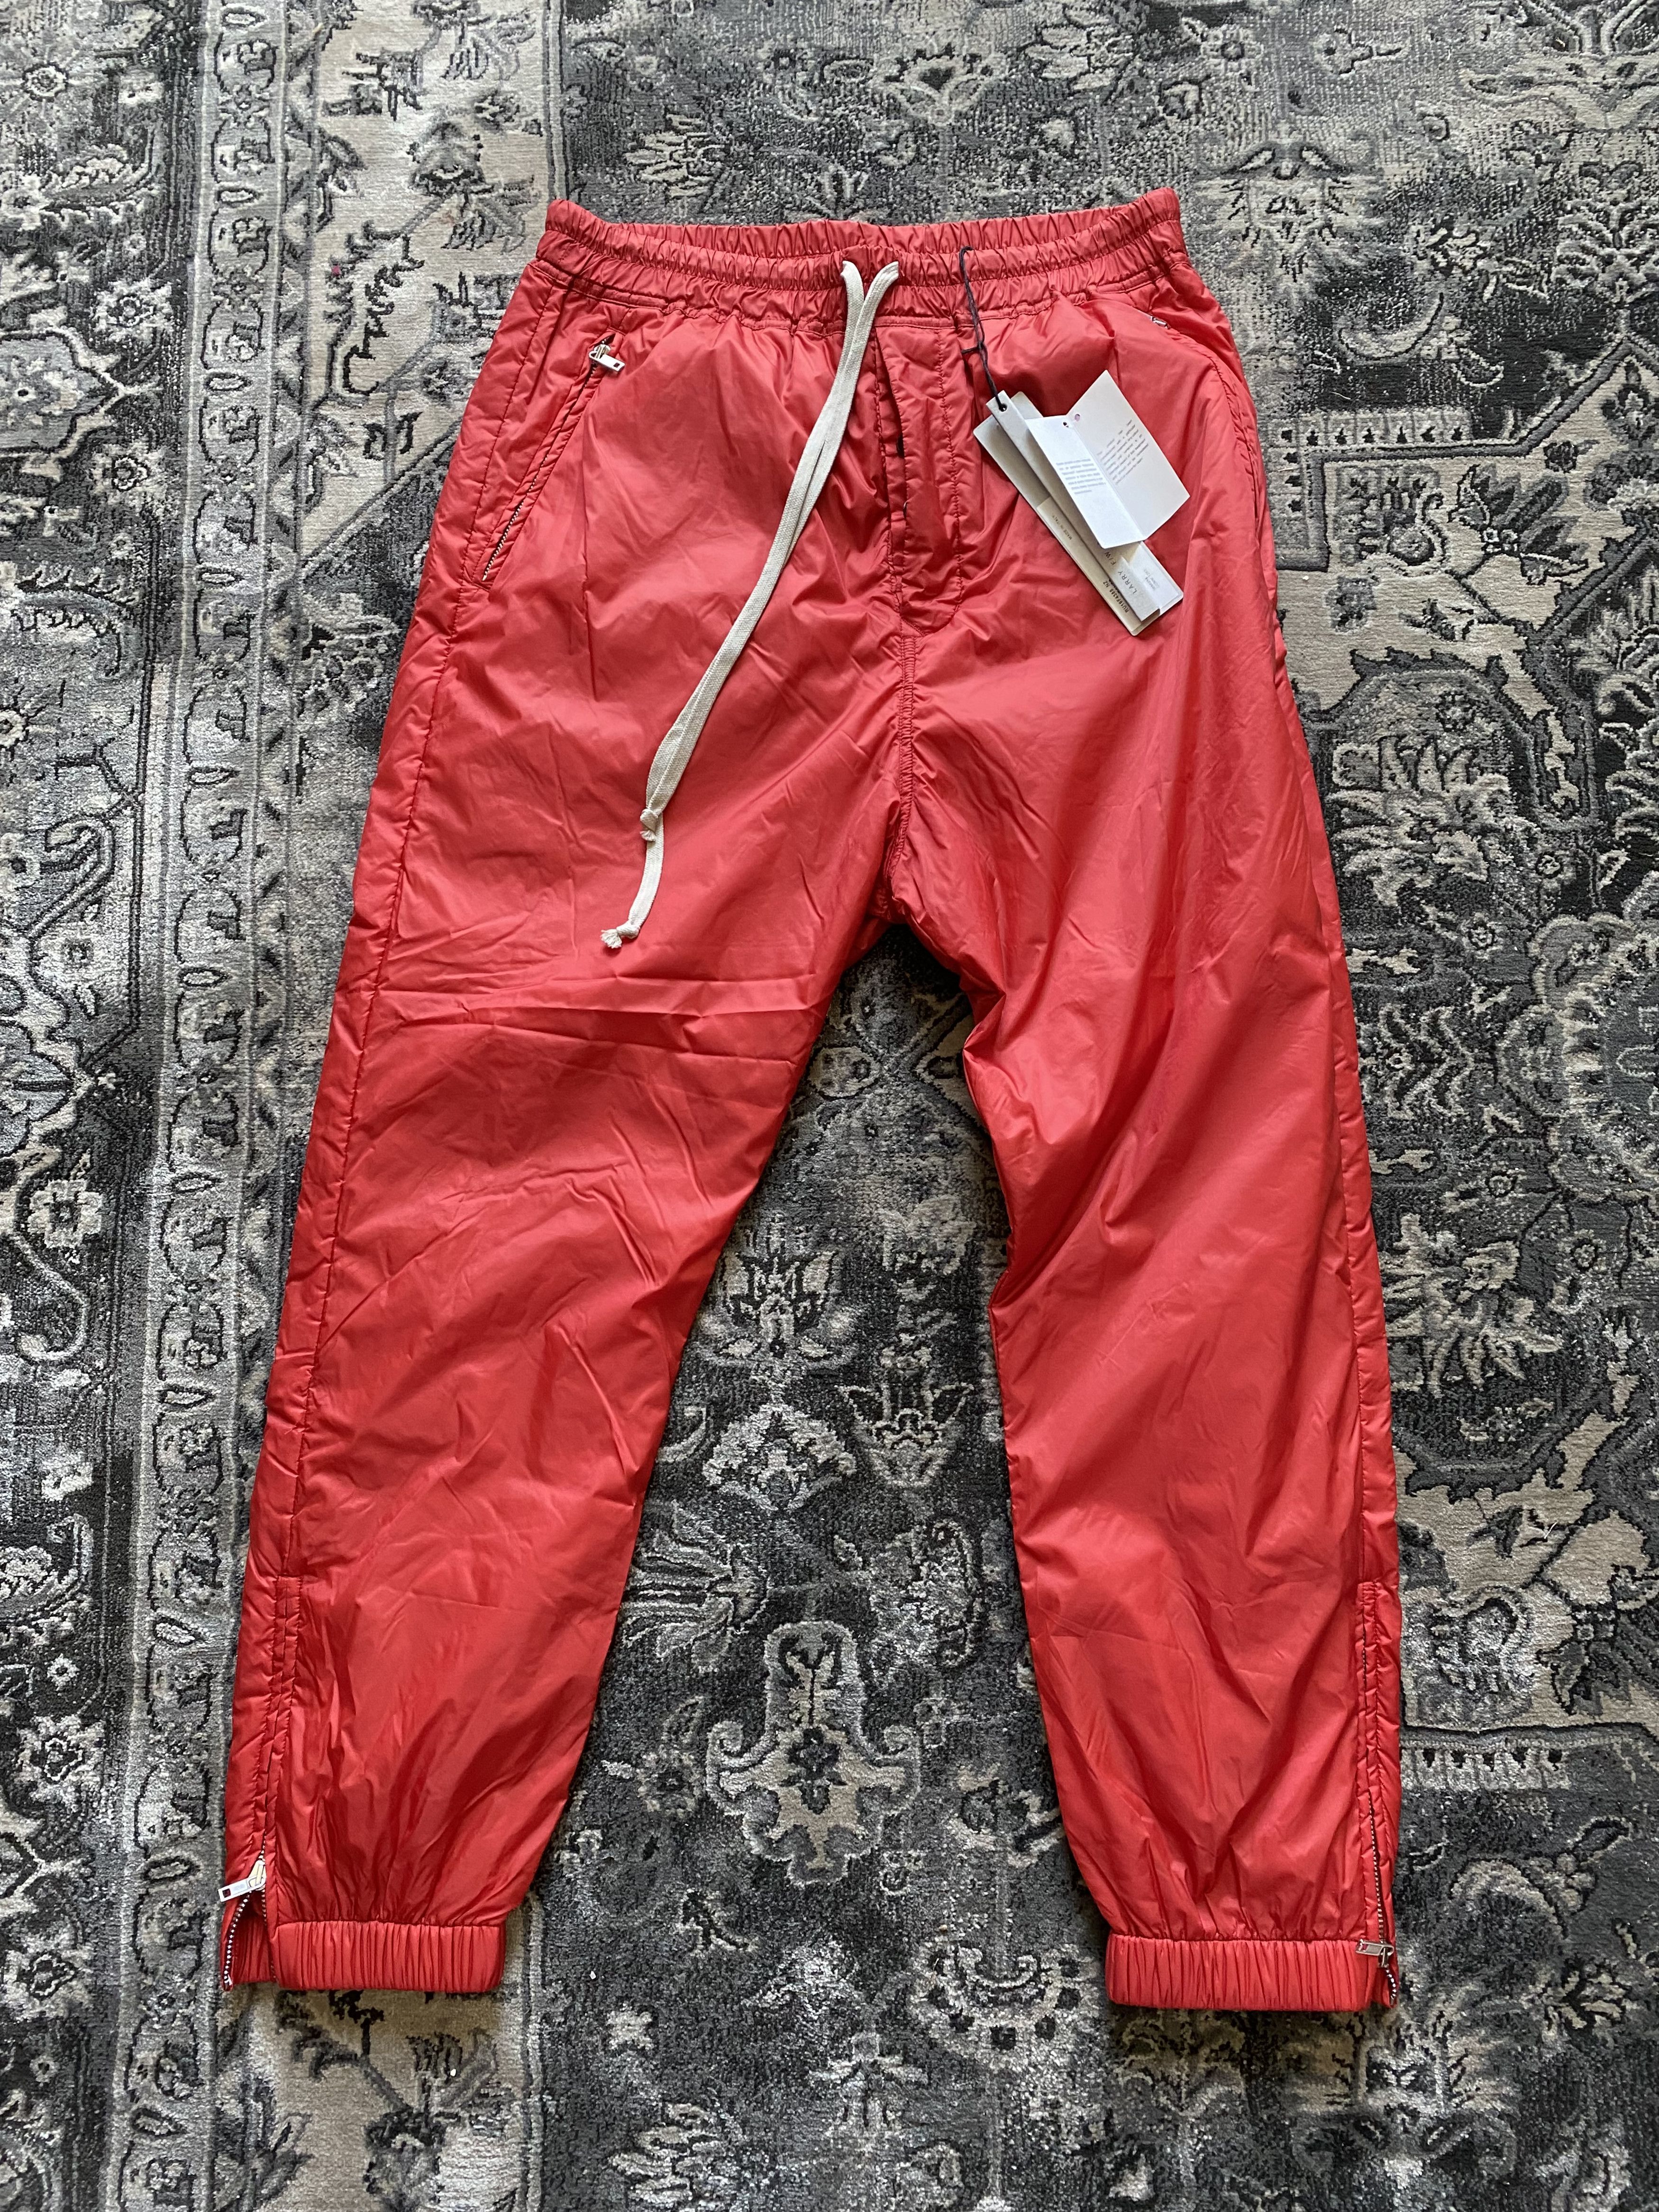 Rick Owens Rick Owens FW 19 Larry Padded Track Jogger Pants | Grailed